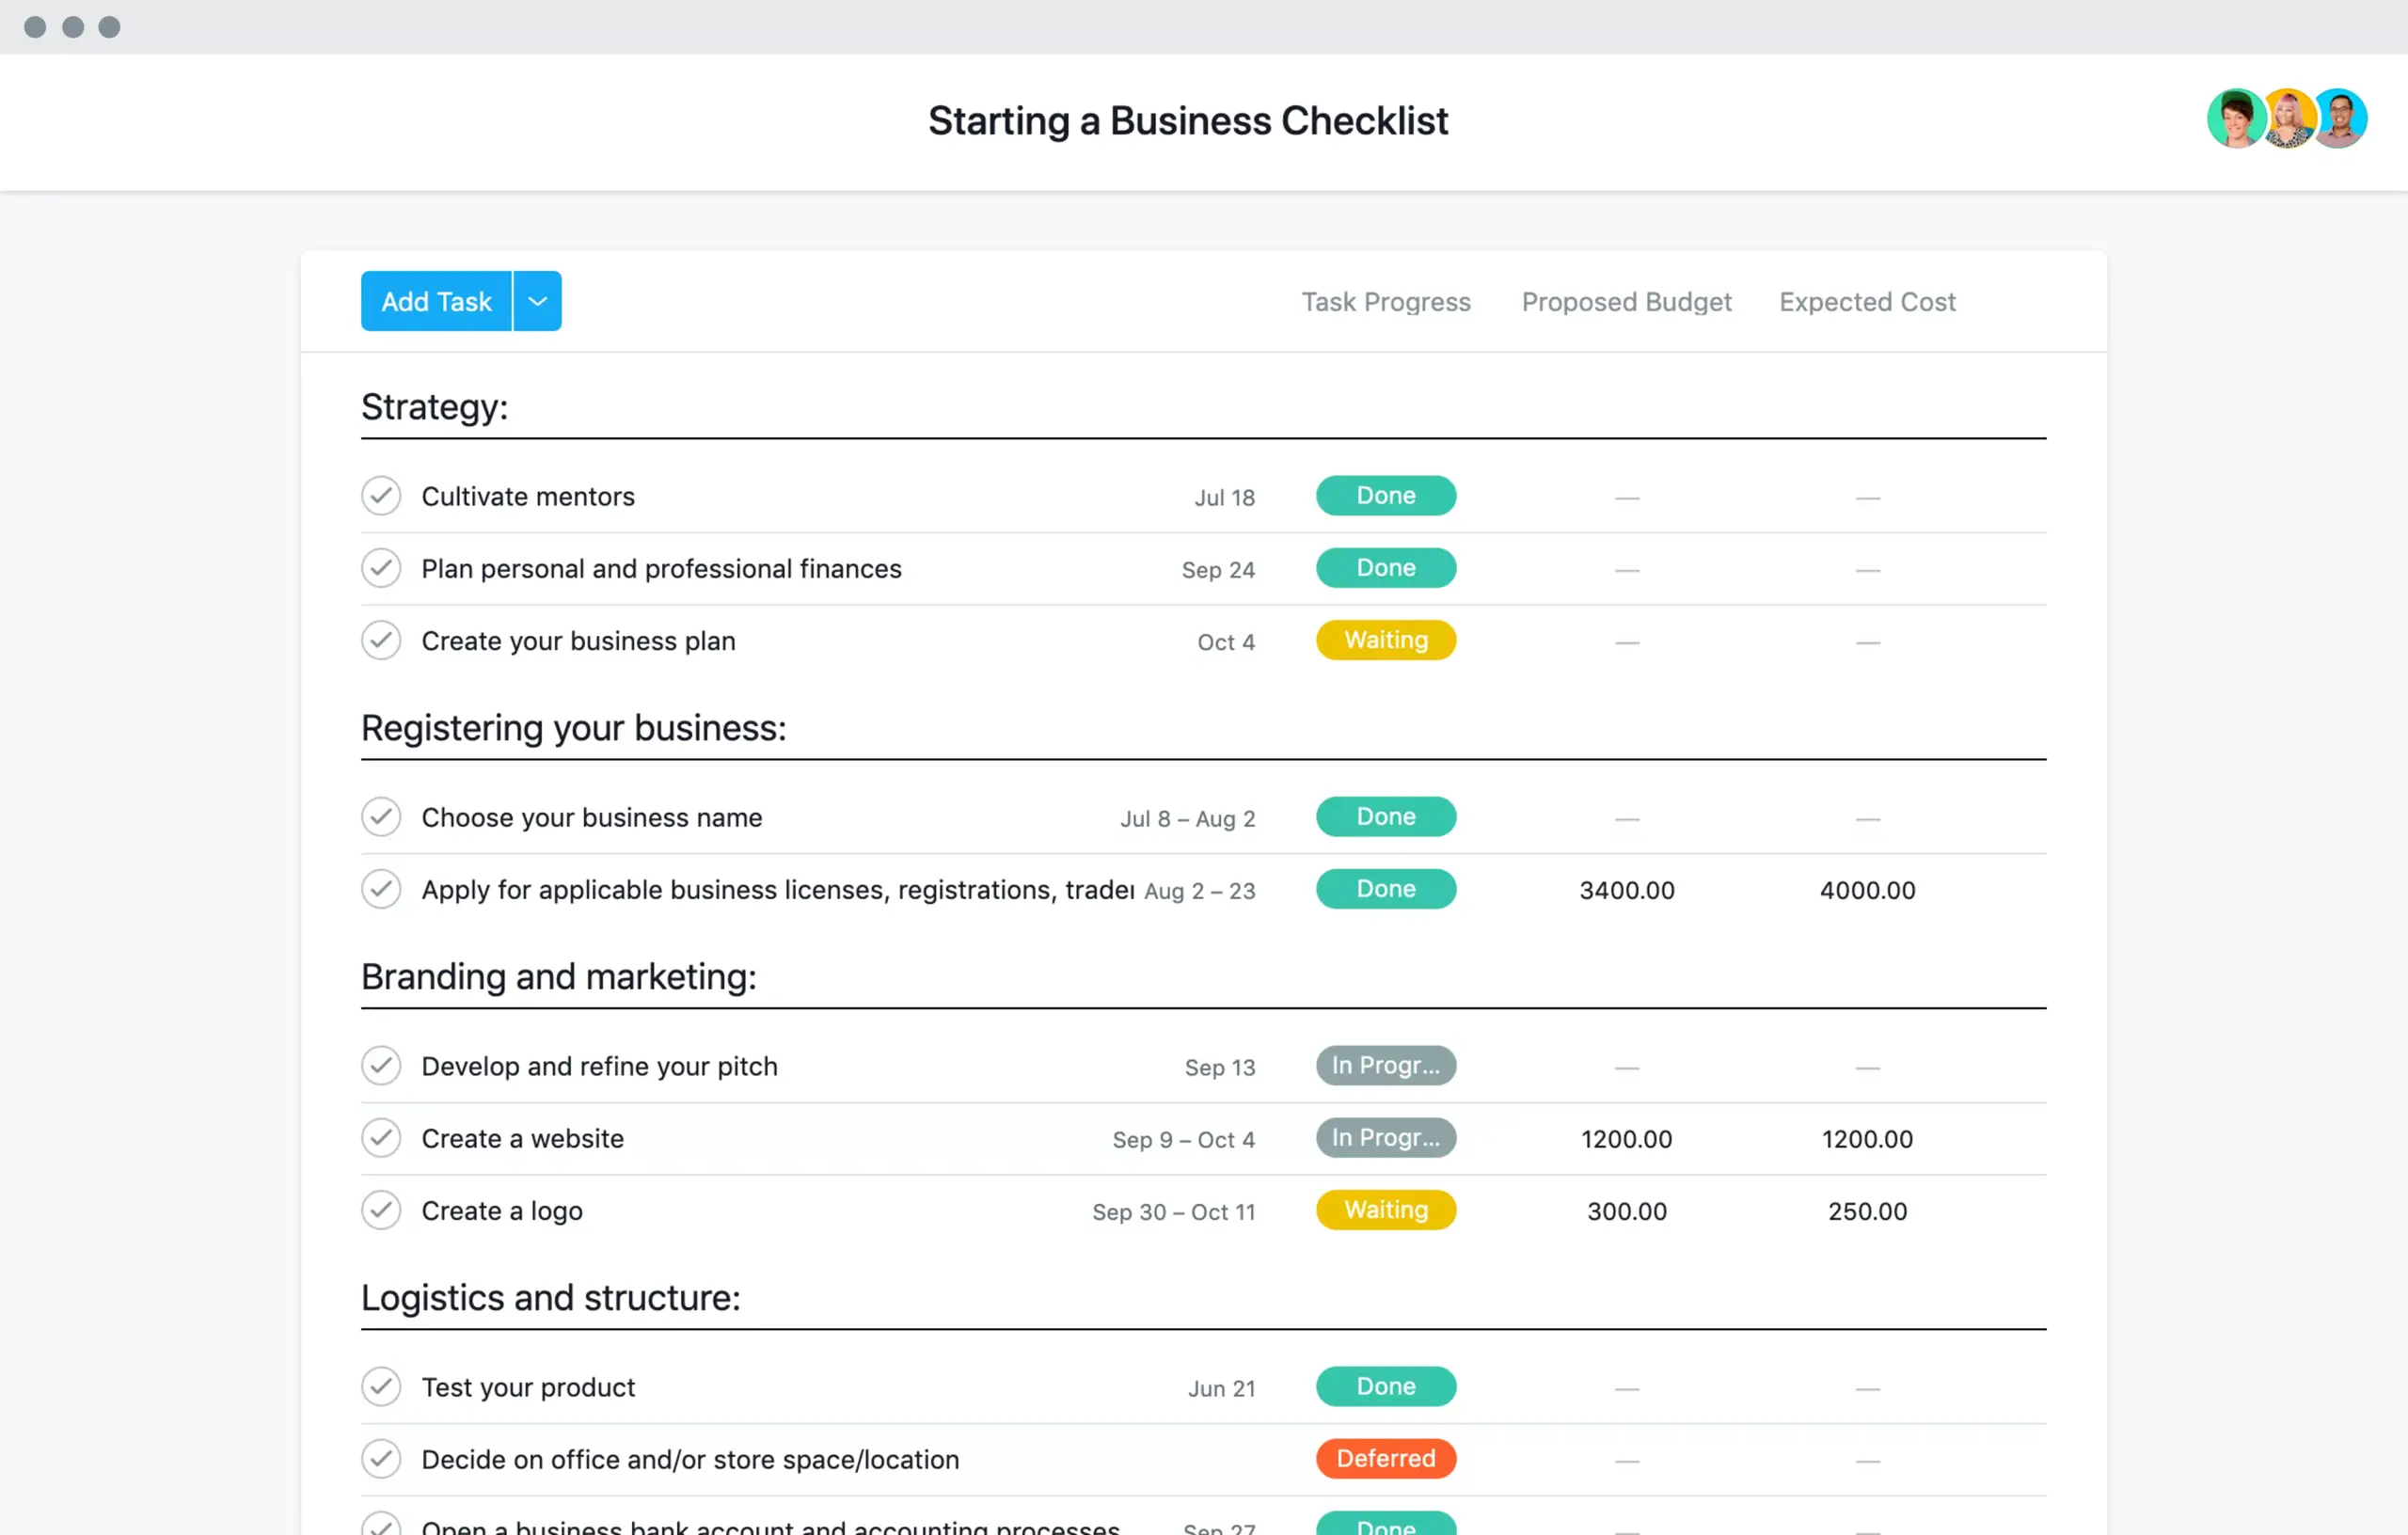 [Old product ui] Starting a business checklist template in Asana, spreadsheet-style project view (List)